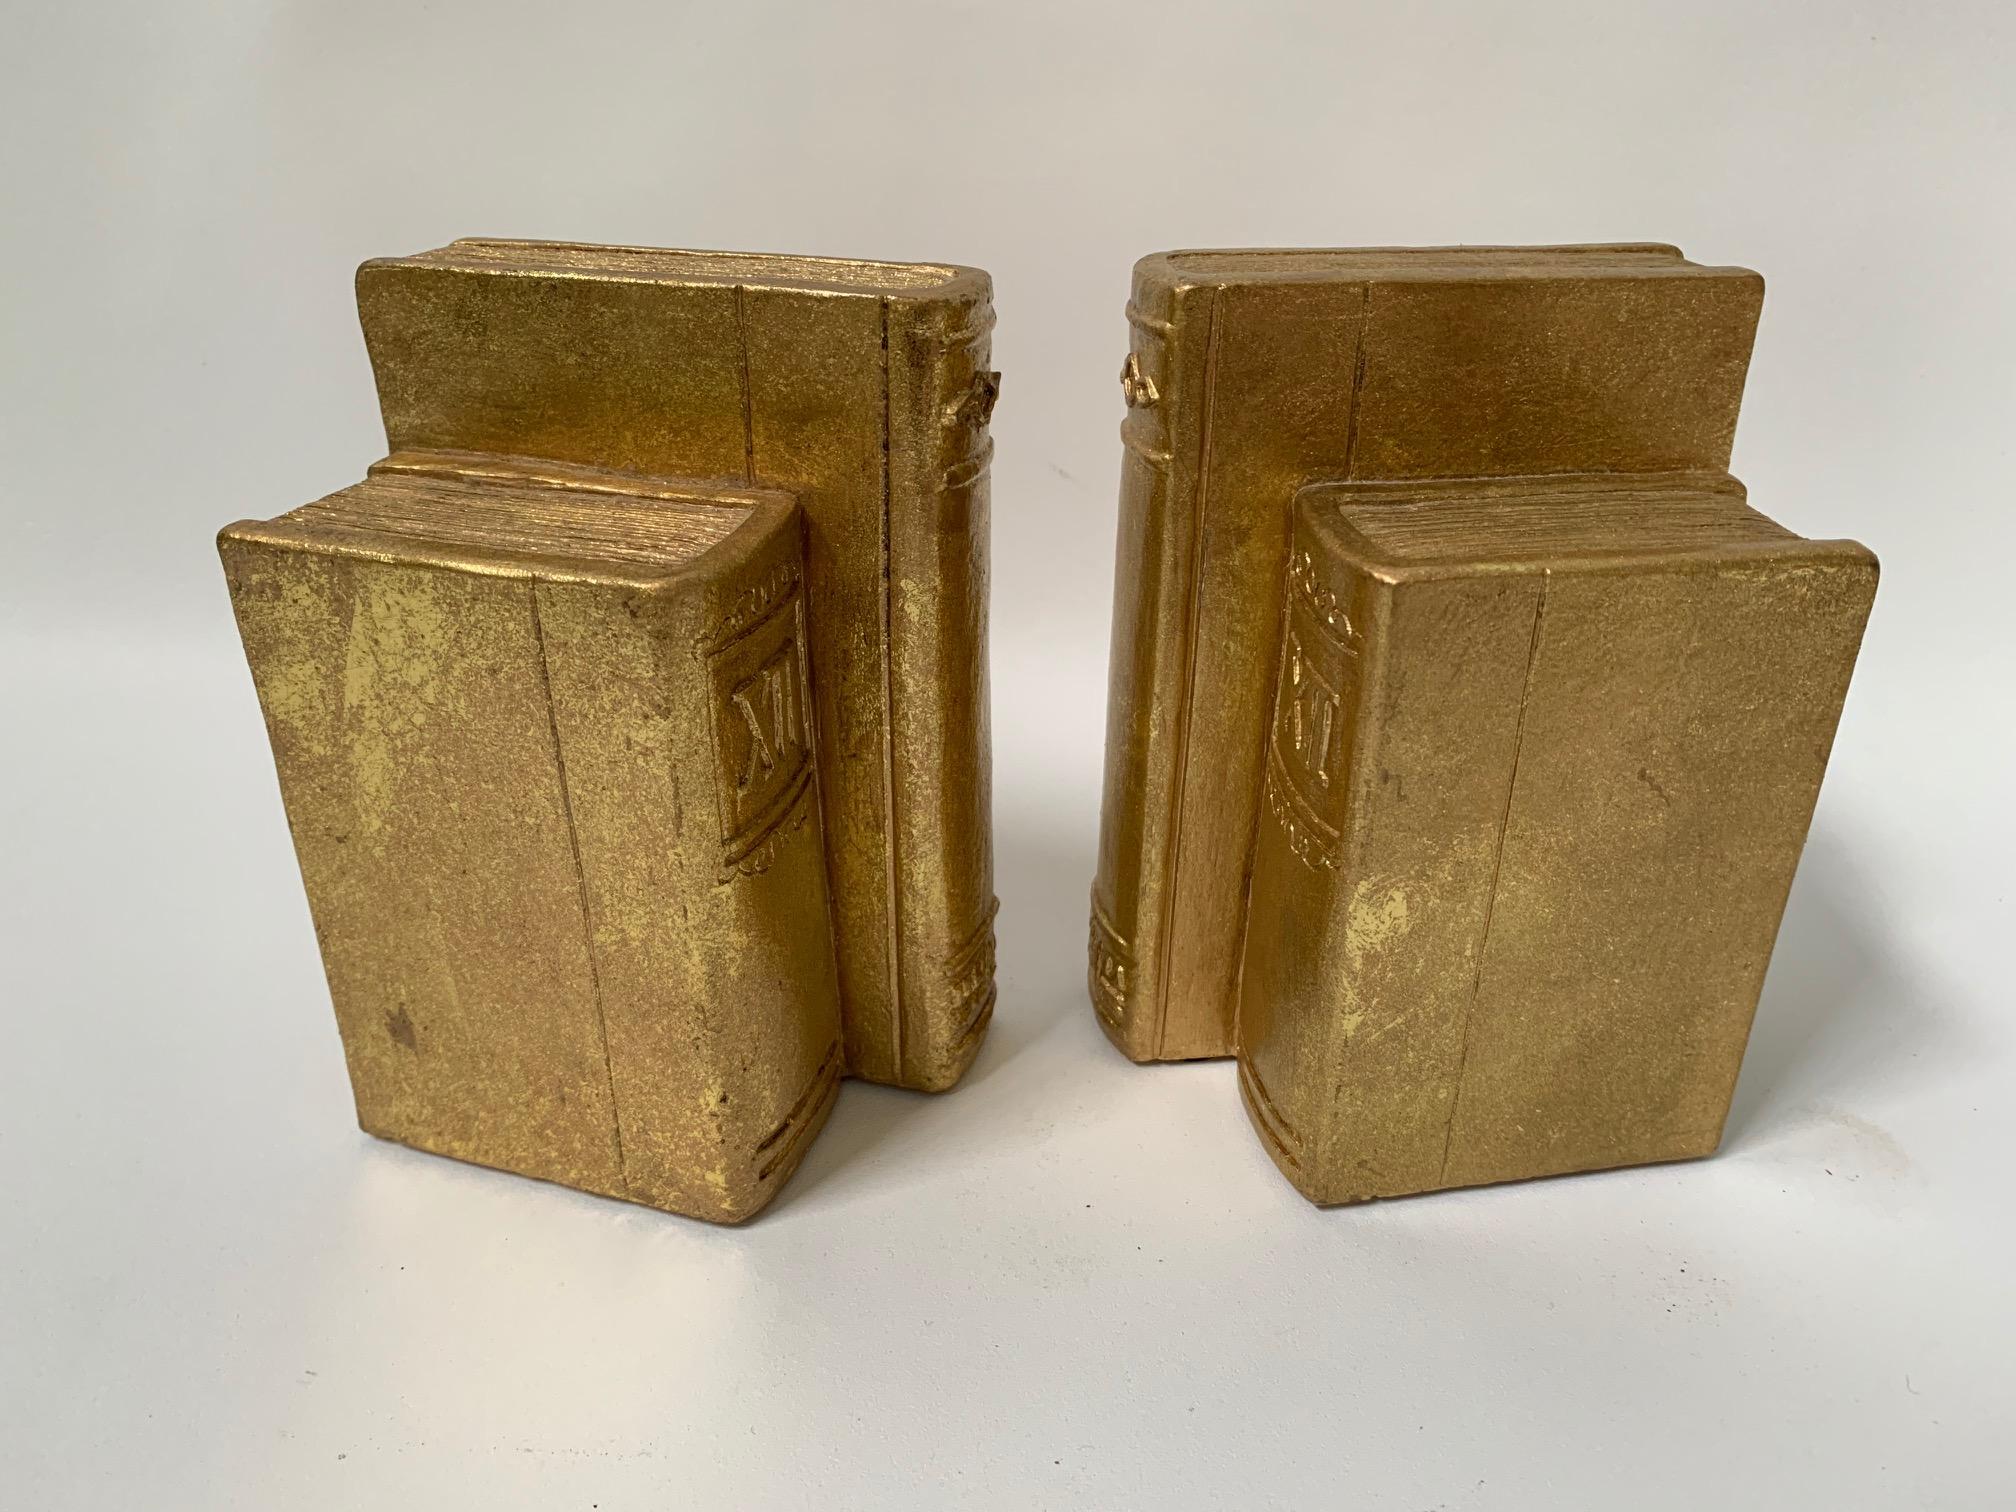 Hollywood Regency Pair of Gold Gilt Book Sculpture Bookends